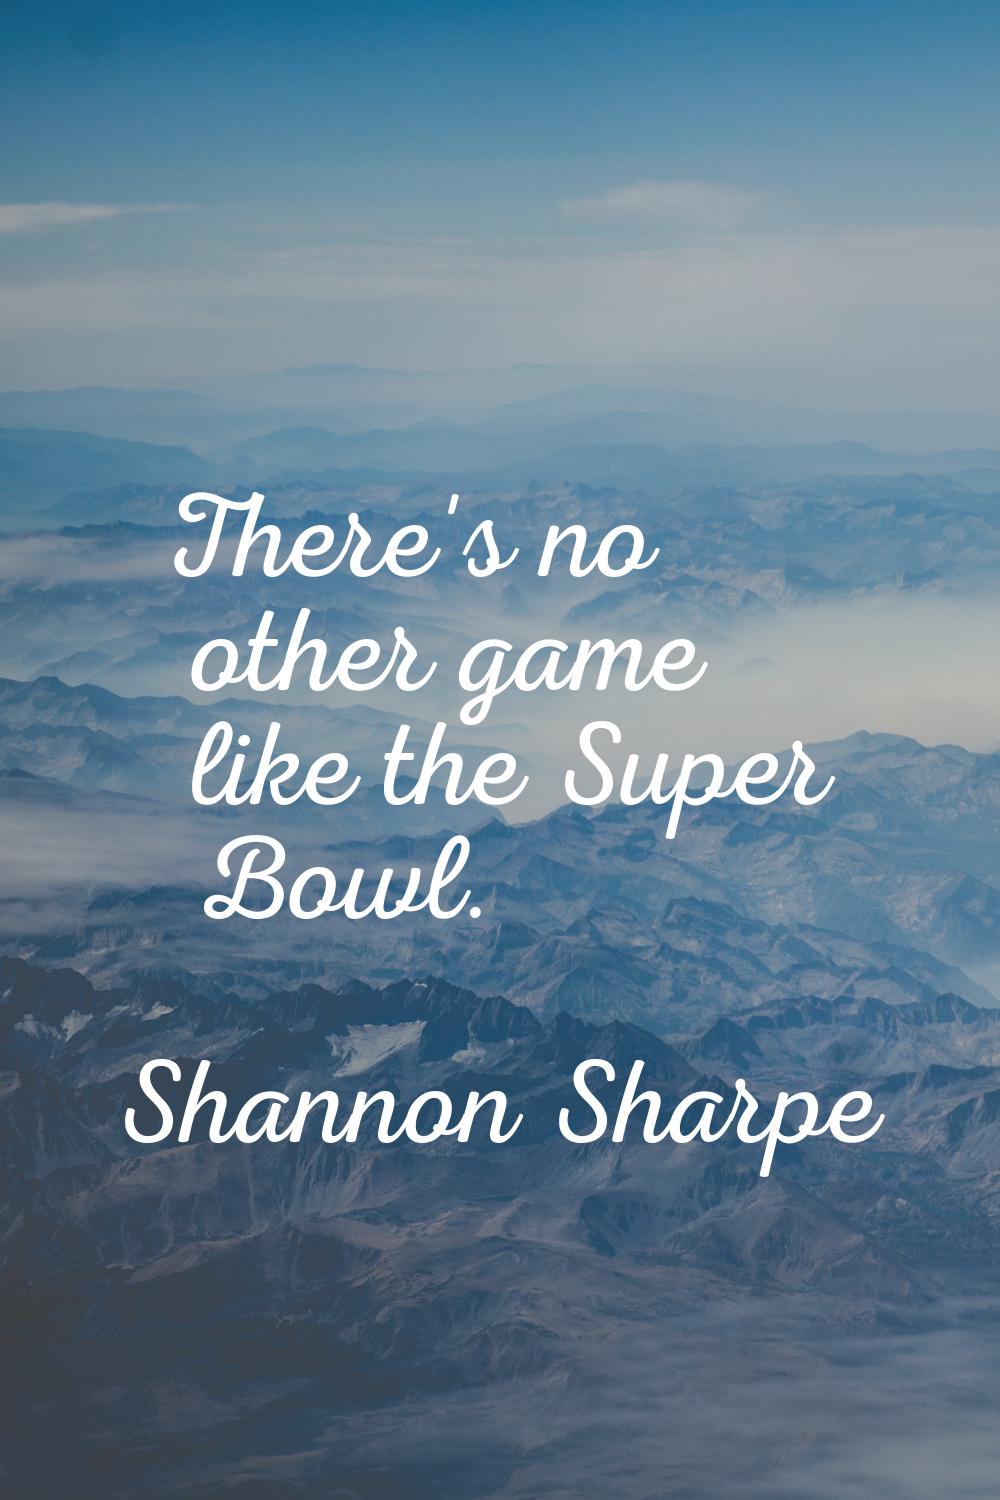 There's no other game like the Super Bowl.